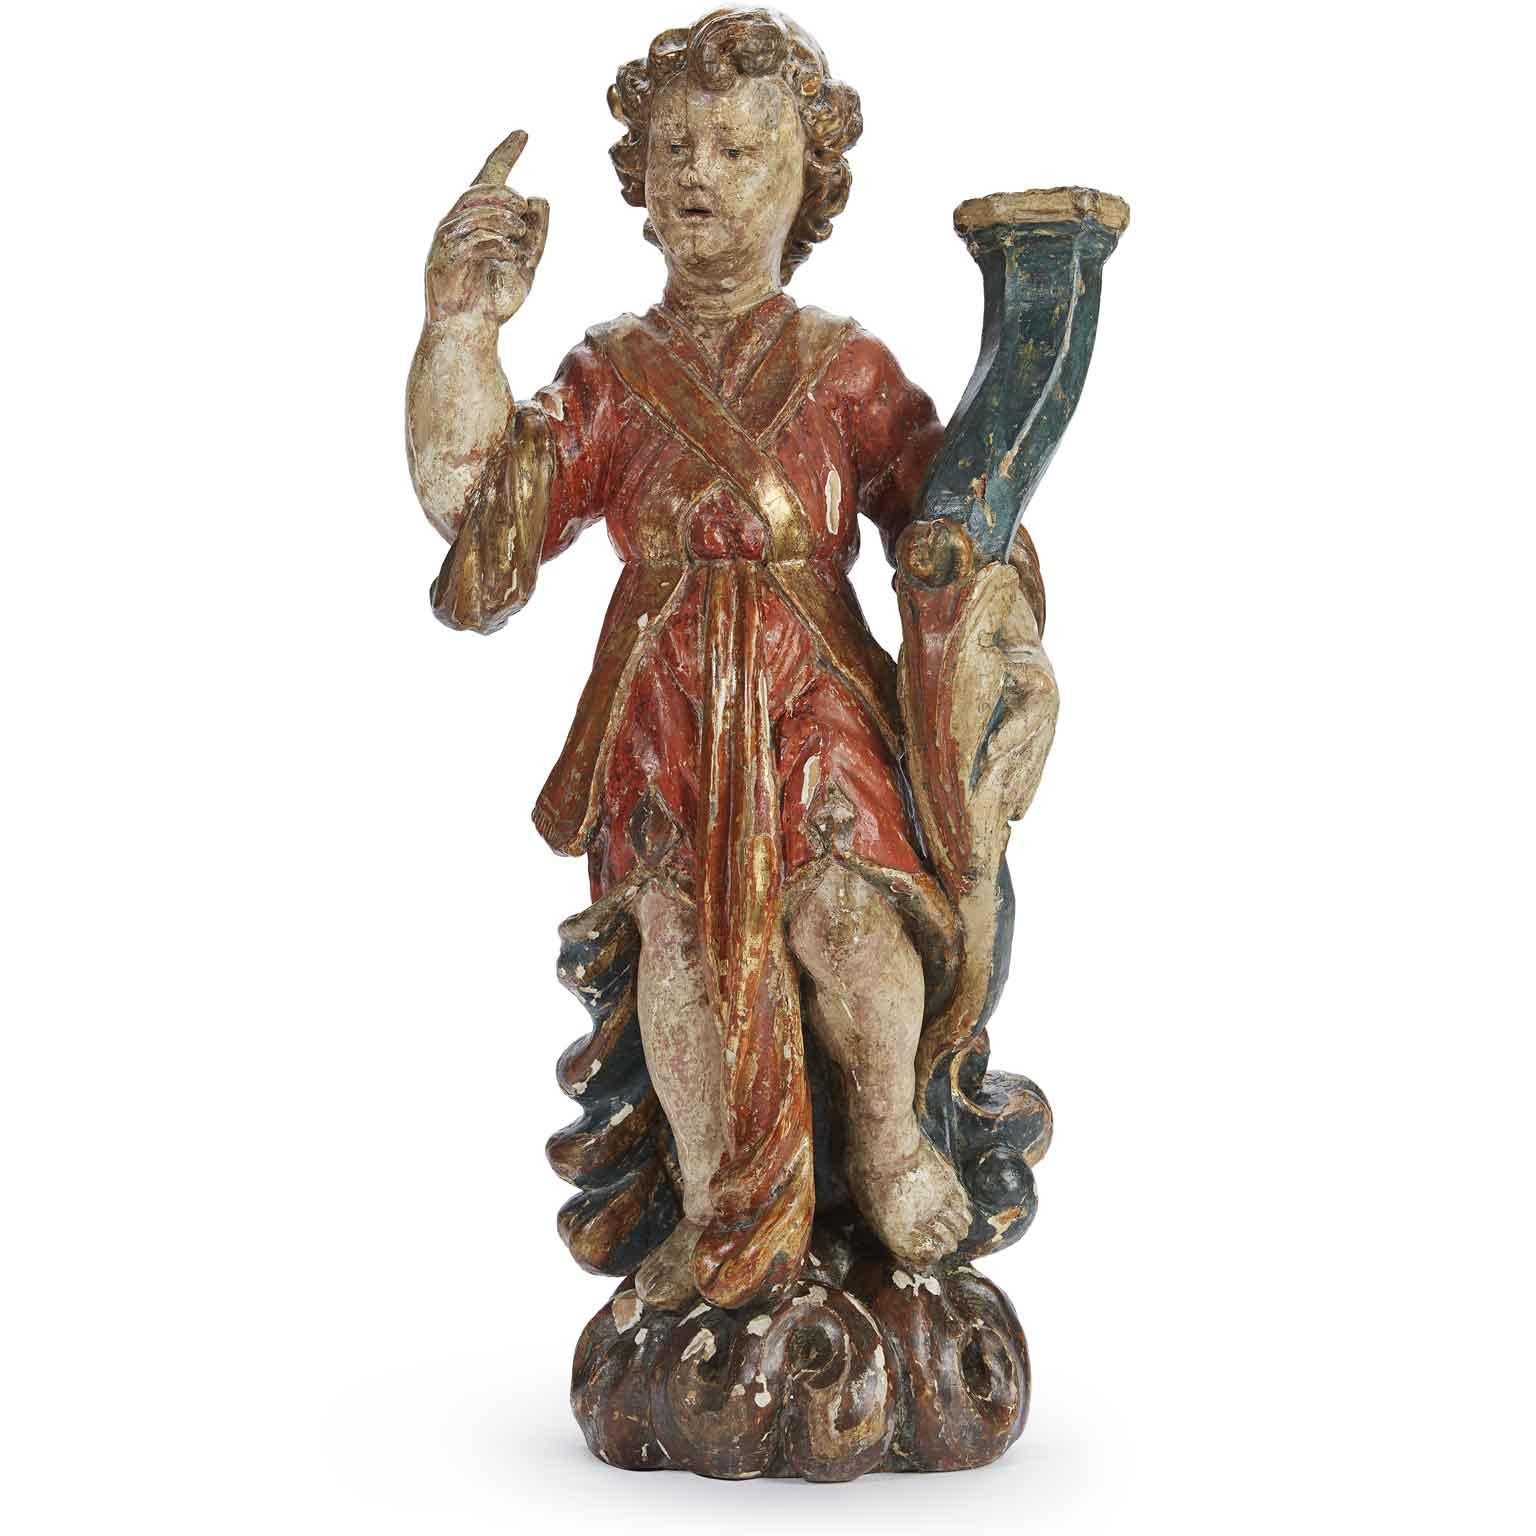 17th Century Pair of Carved Lacquered and Gilded Candle Holder Angels Italian Sculptures 1650s For Sale